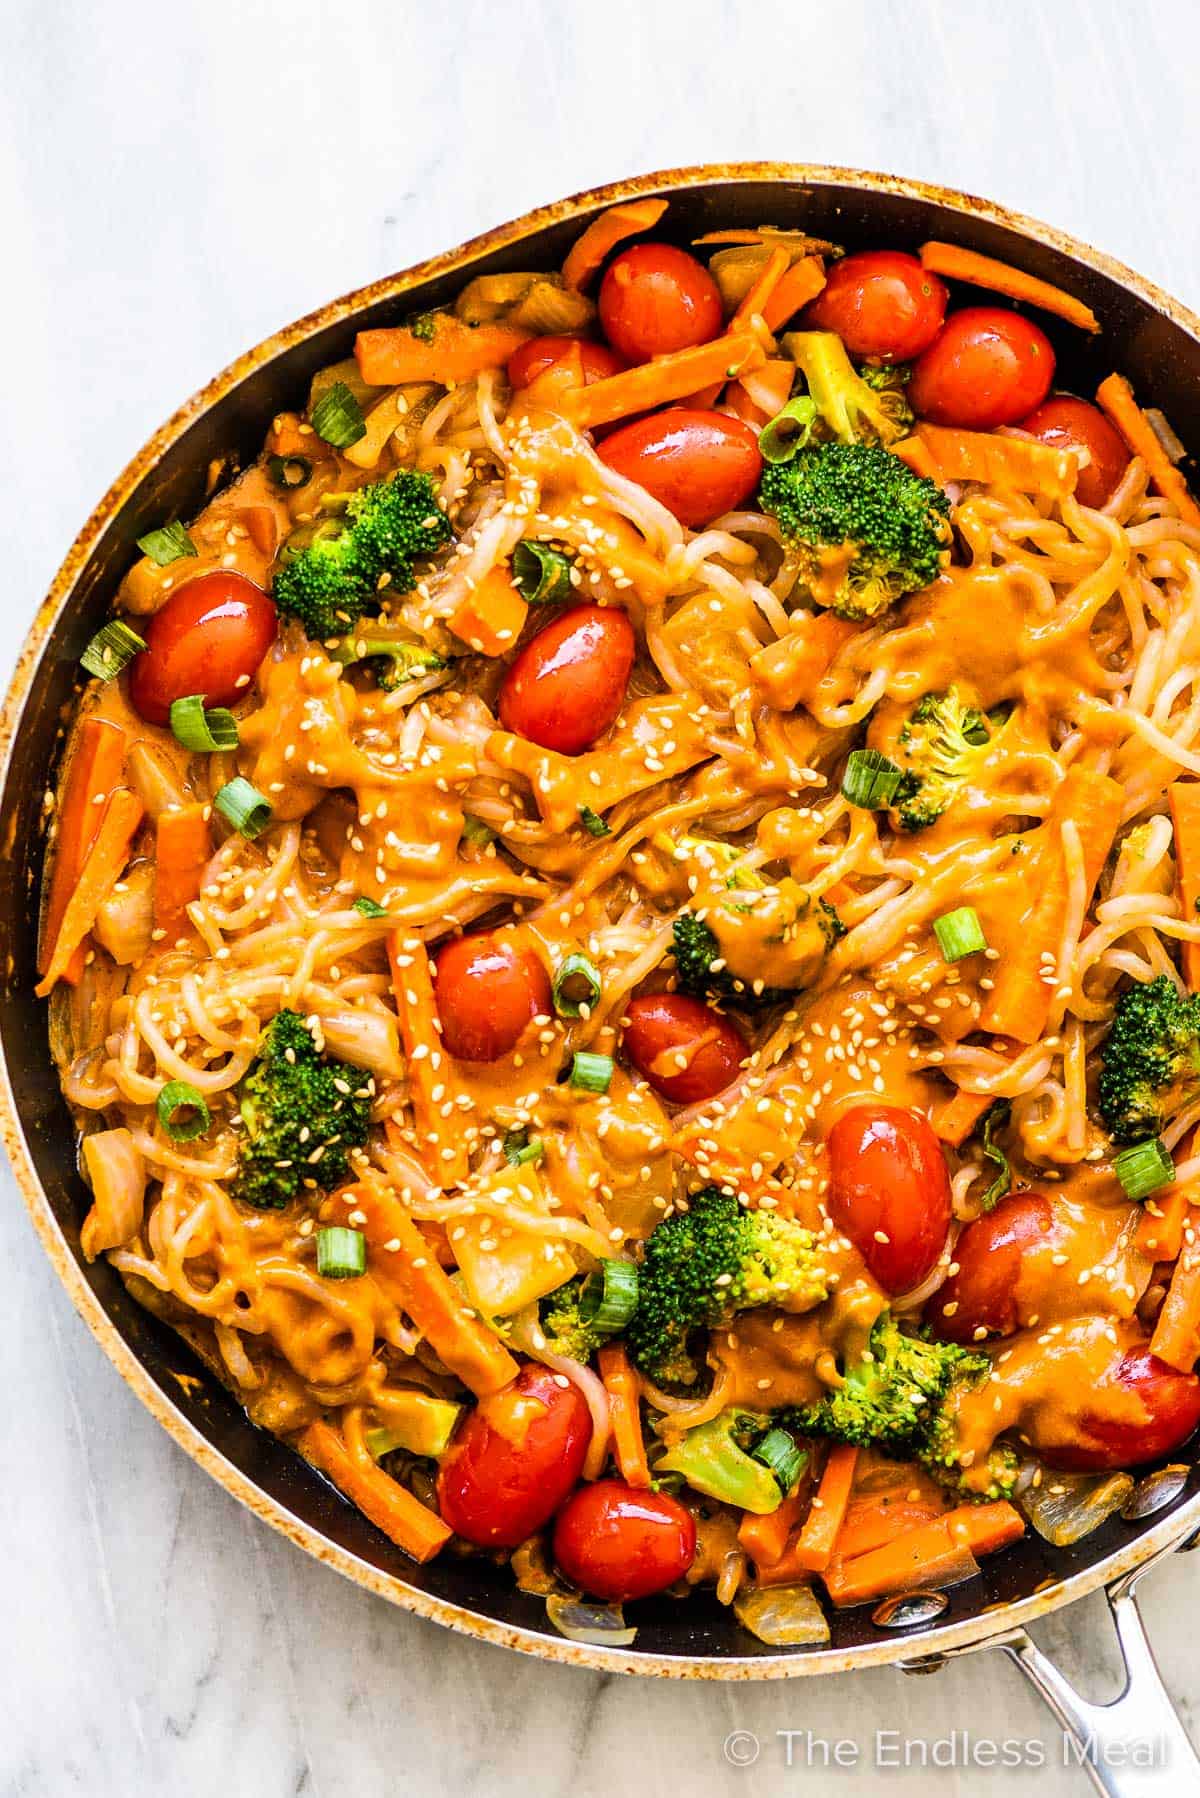 shirataki noodles in a pan with veggies and a peanut sauce.